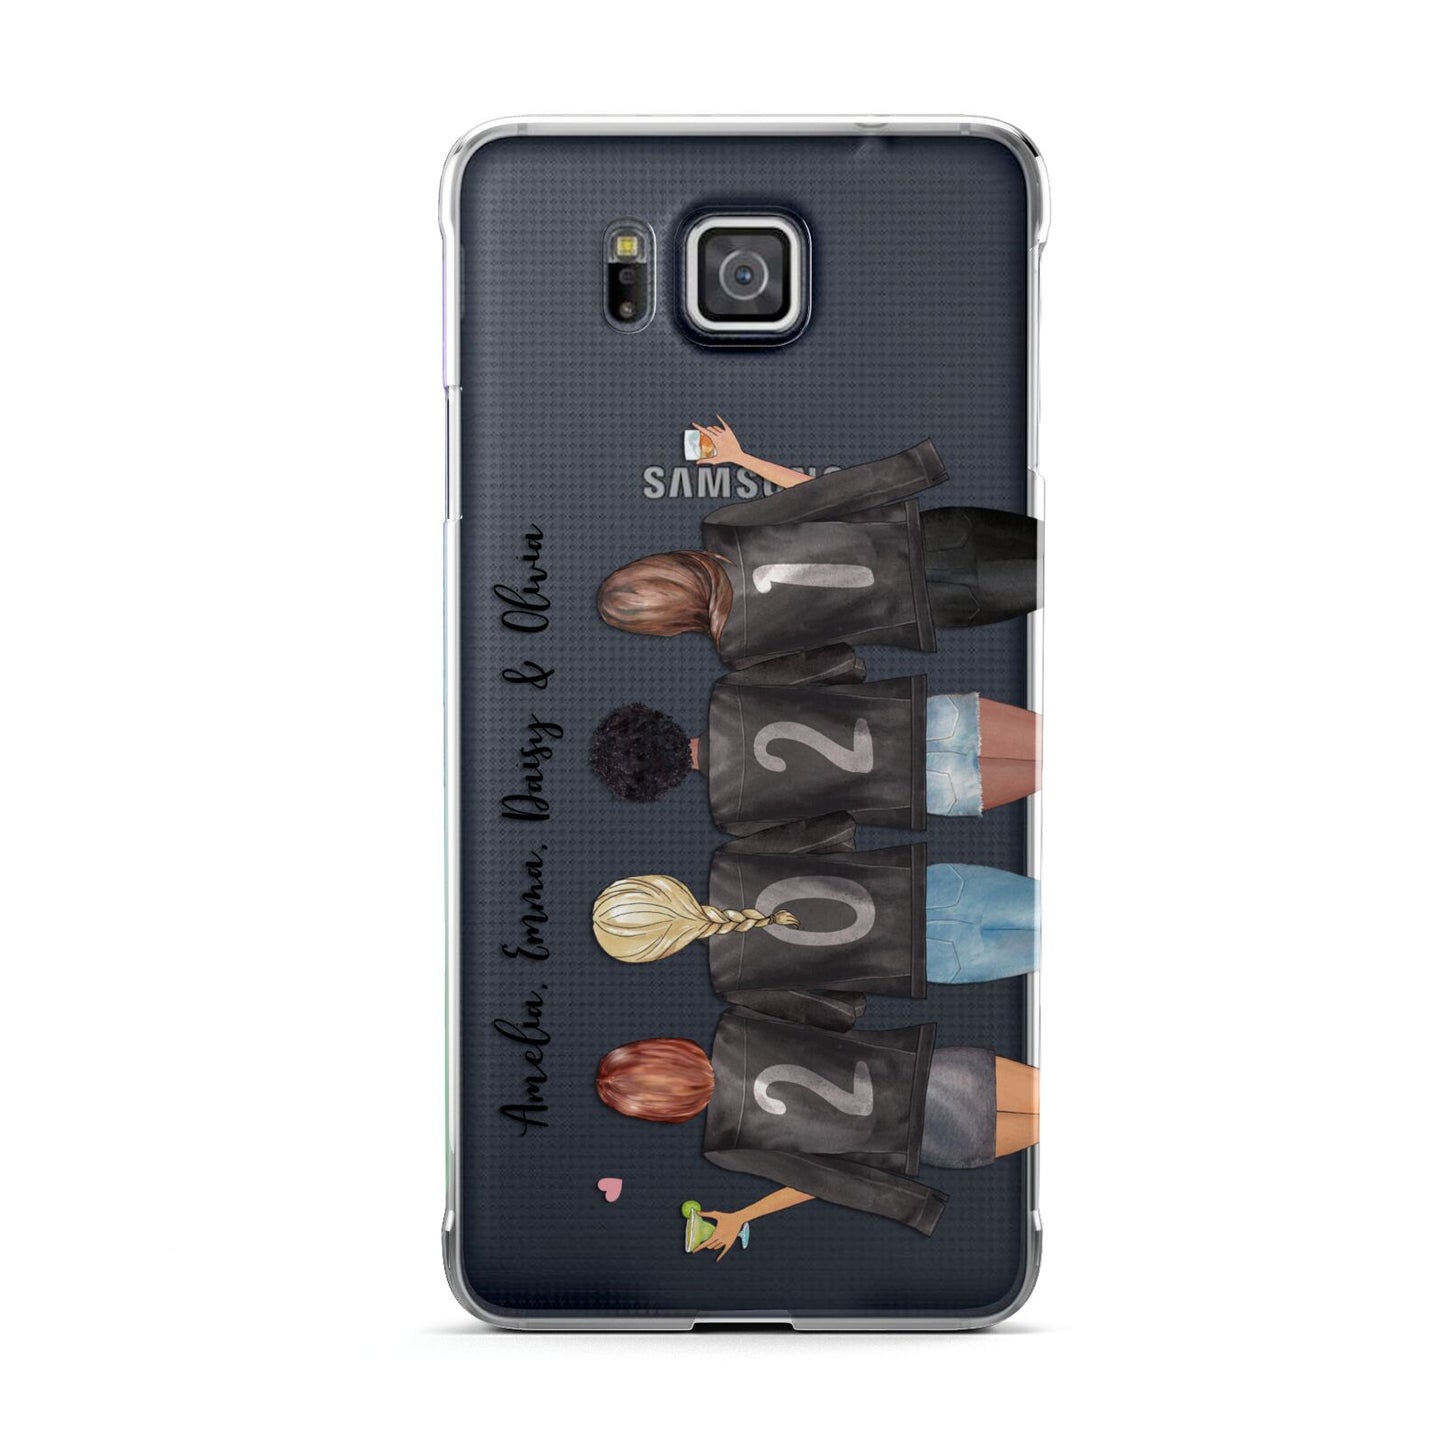 4 Best Friends with Names Samsung Galaxy Alpha Case